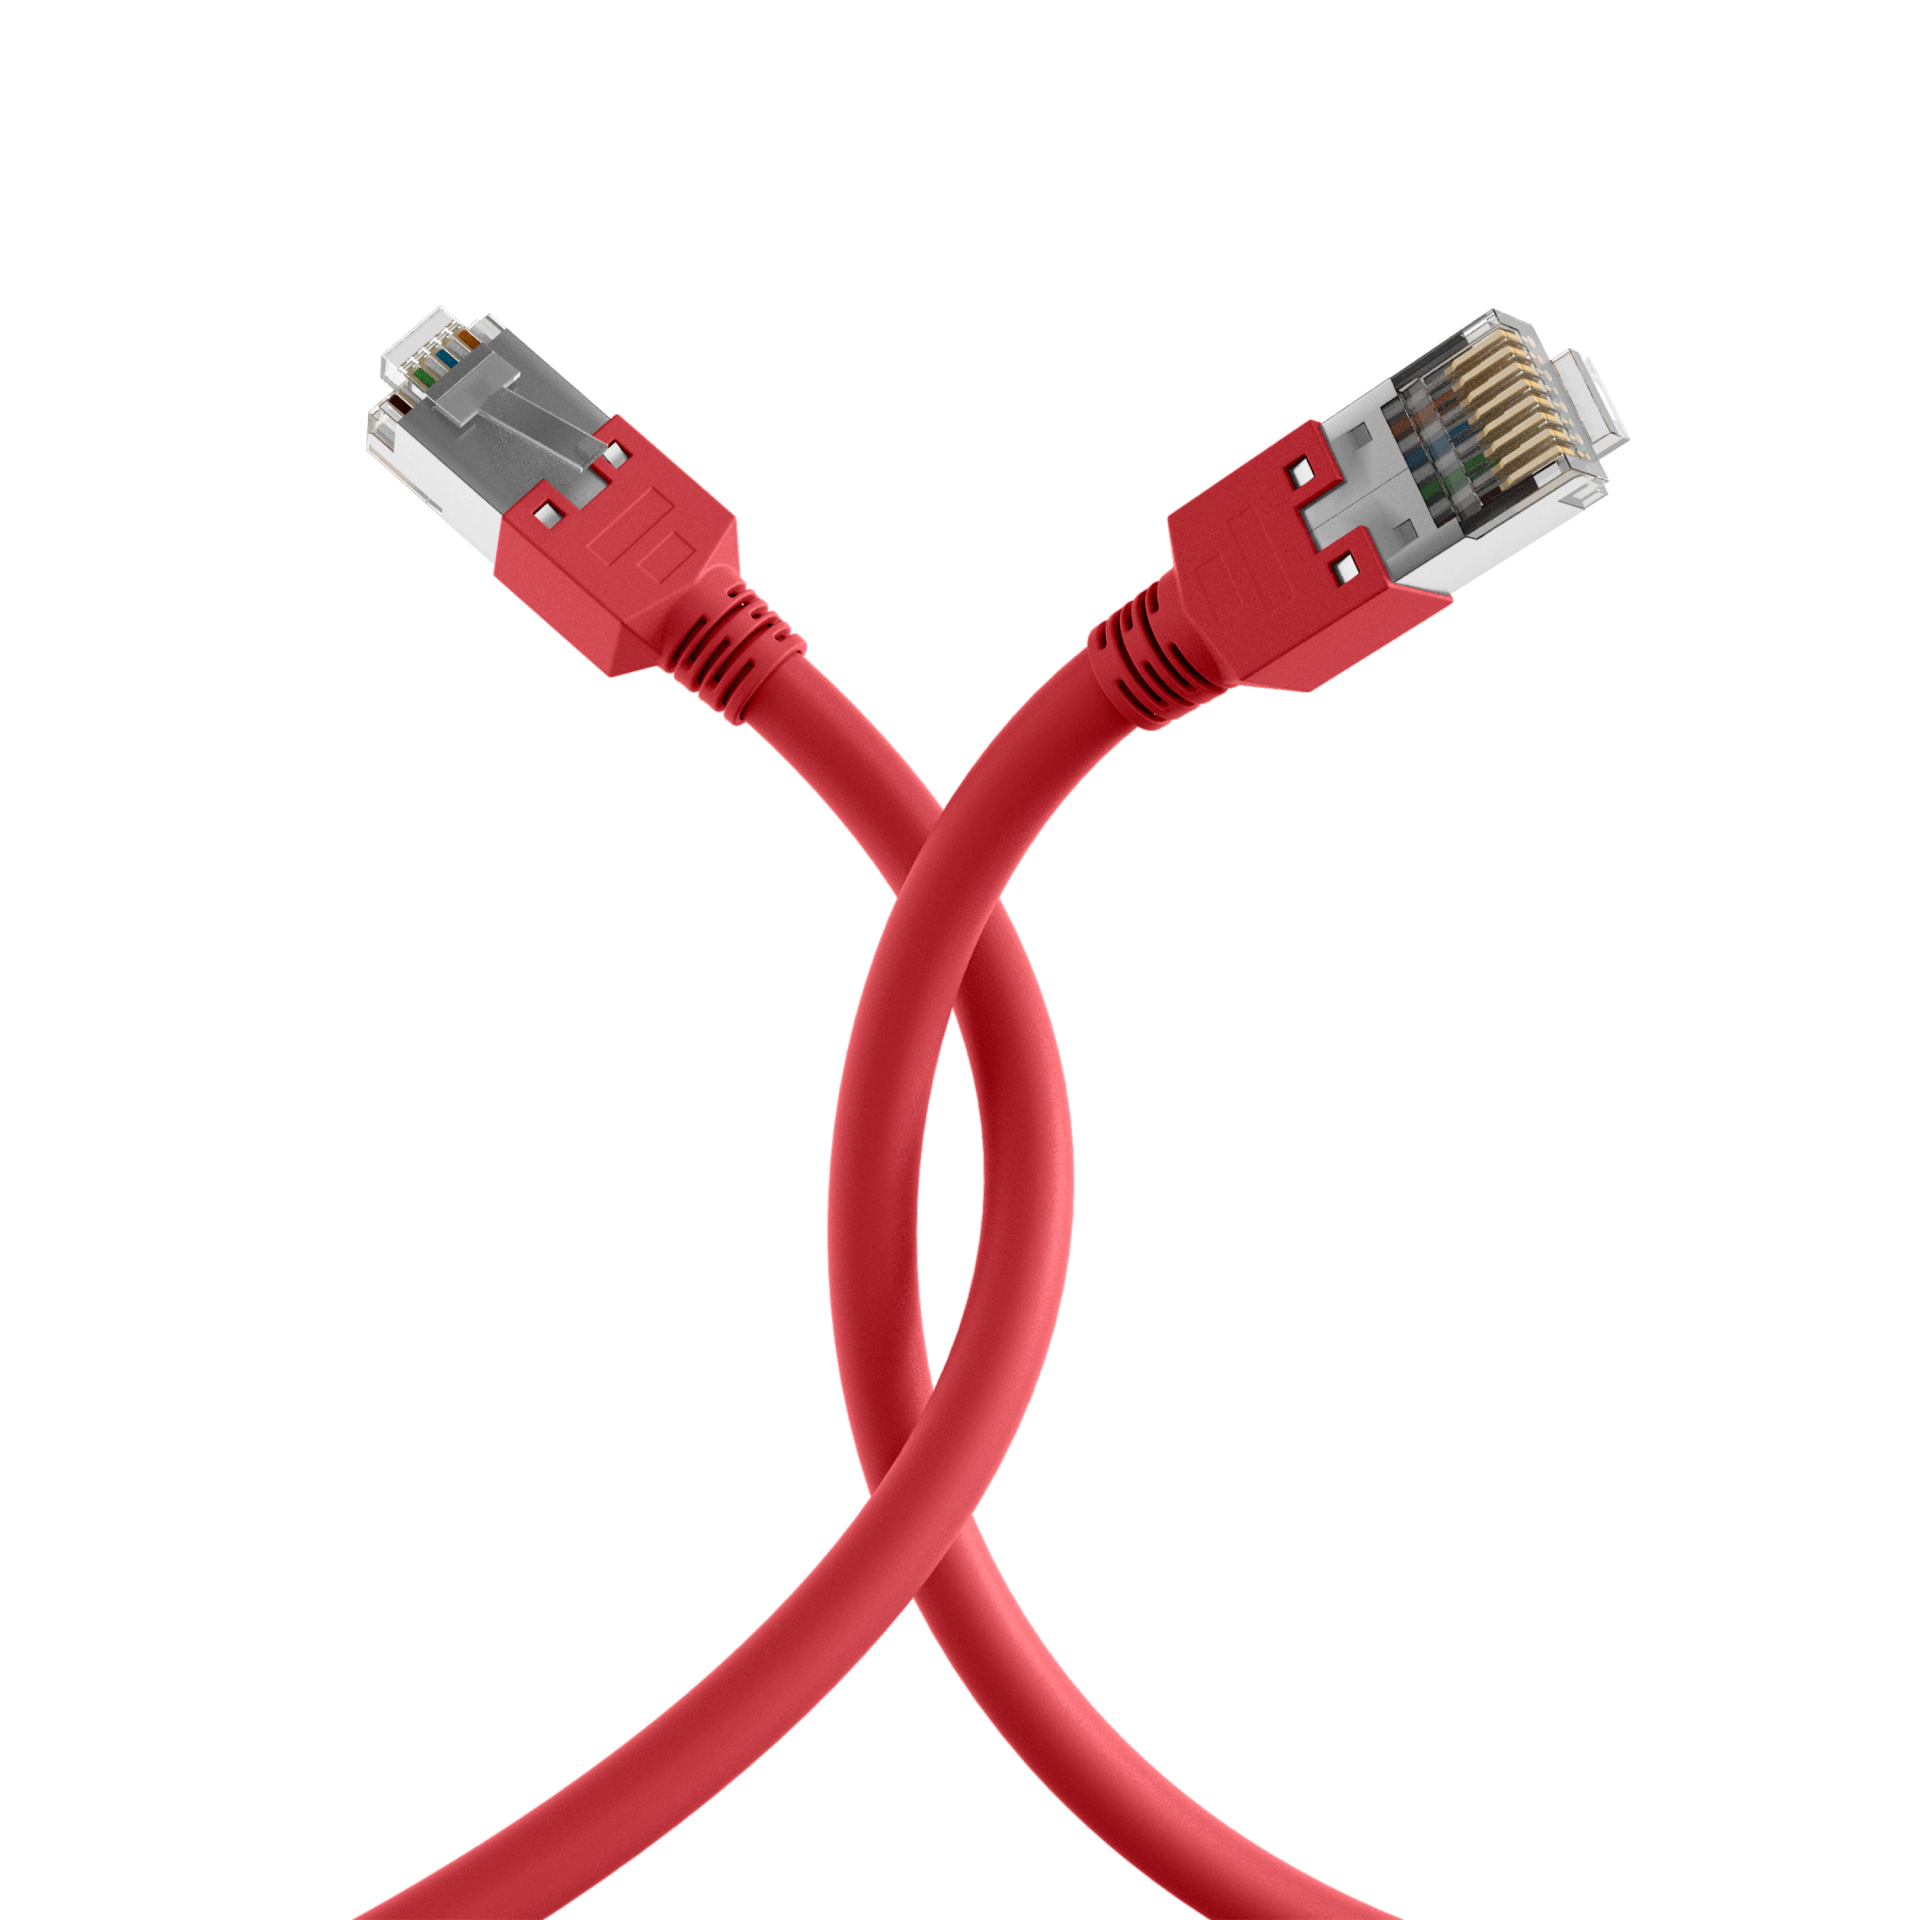 RJ45 Patch Cord Cat.5e S/UTP PVCDätwyler 5502 TM11 red 10m